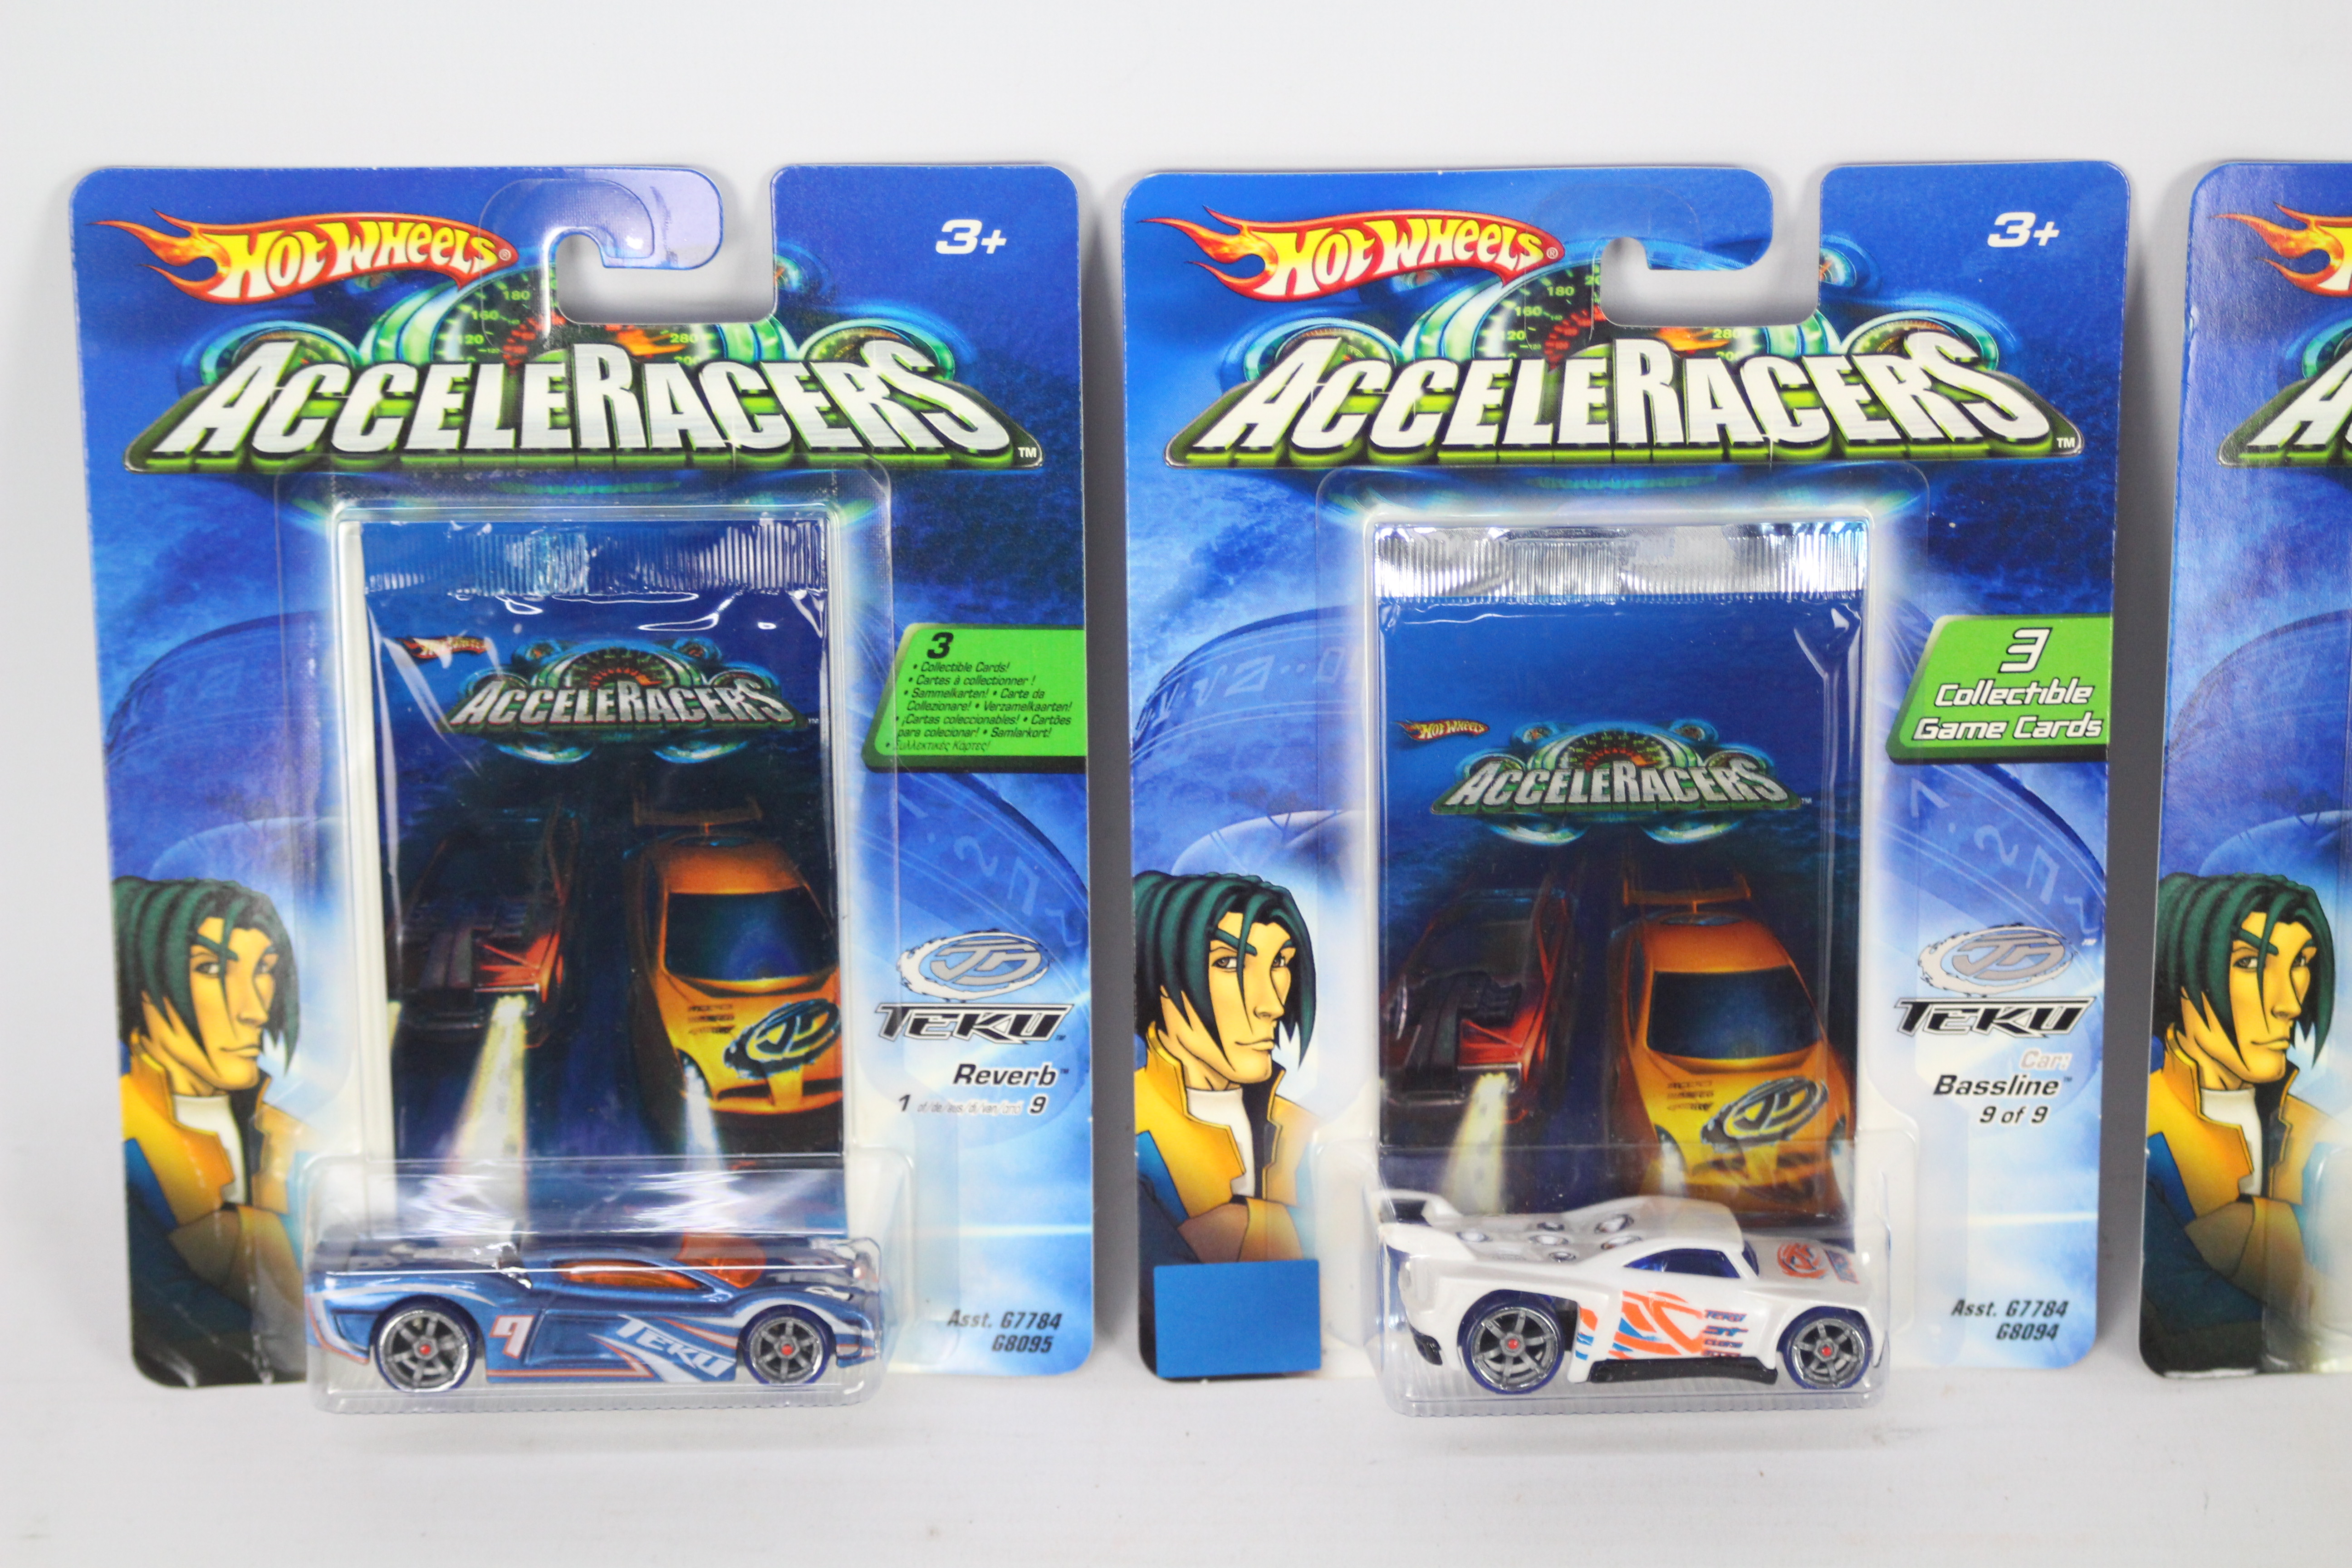 Hot Wheels - Acceleracers - 4 x unopened models from the Teku range, Reverb # G8095, - Image 2 of 3